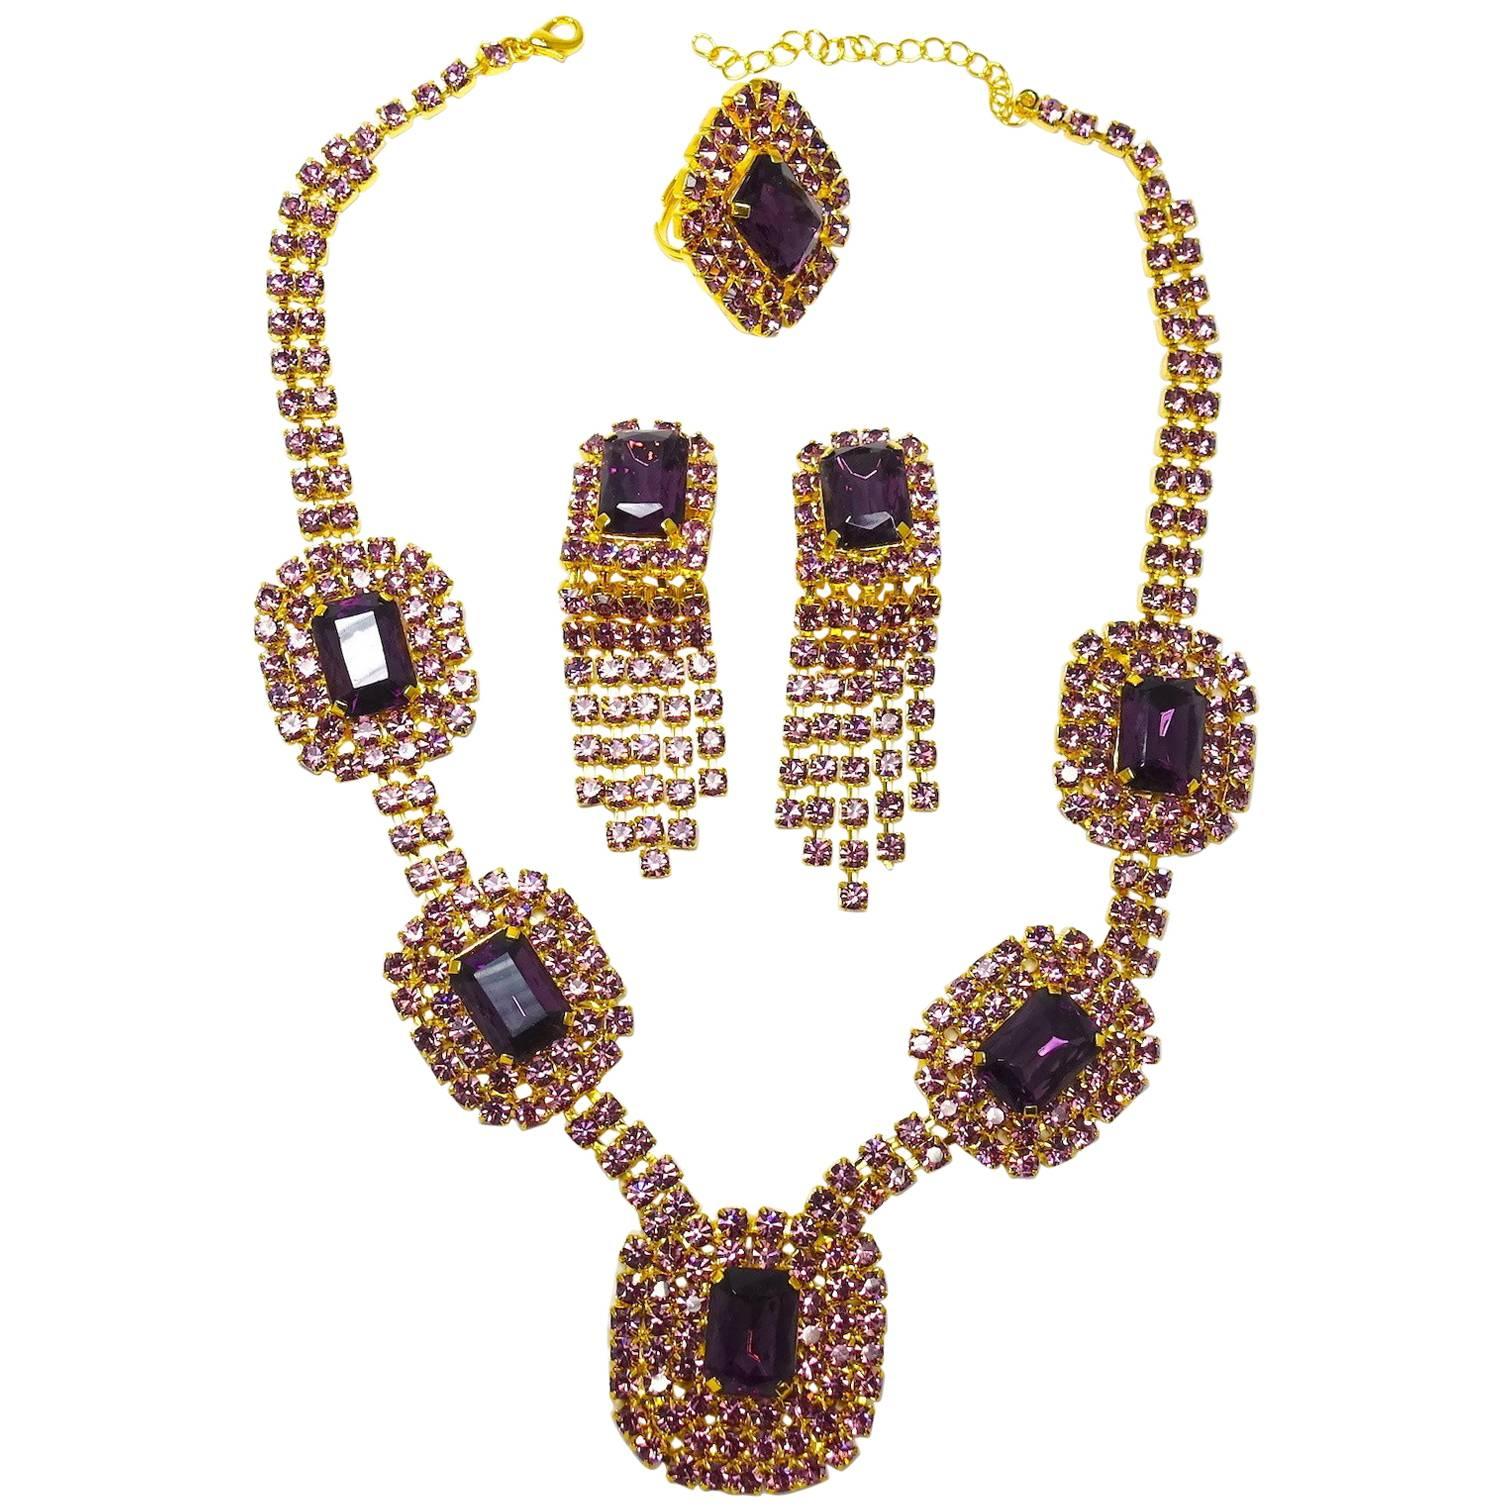 Rare Vintage Czech Amethyst Crystal Necklace, Drop Earrings & Ring For Sale